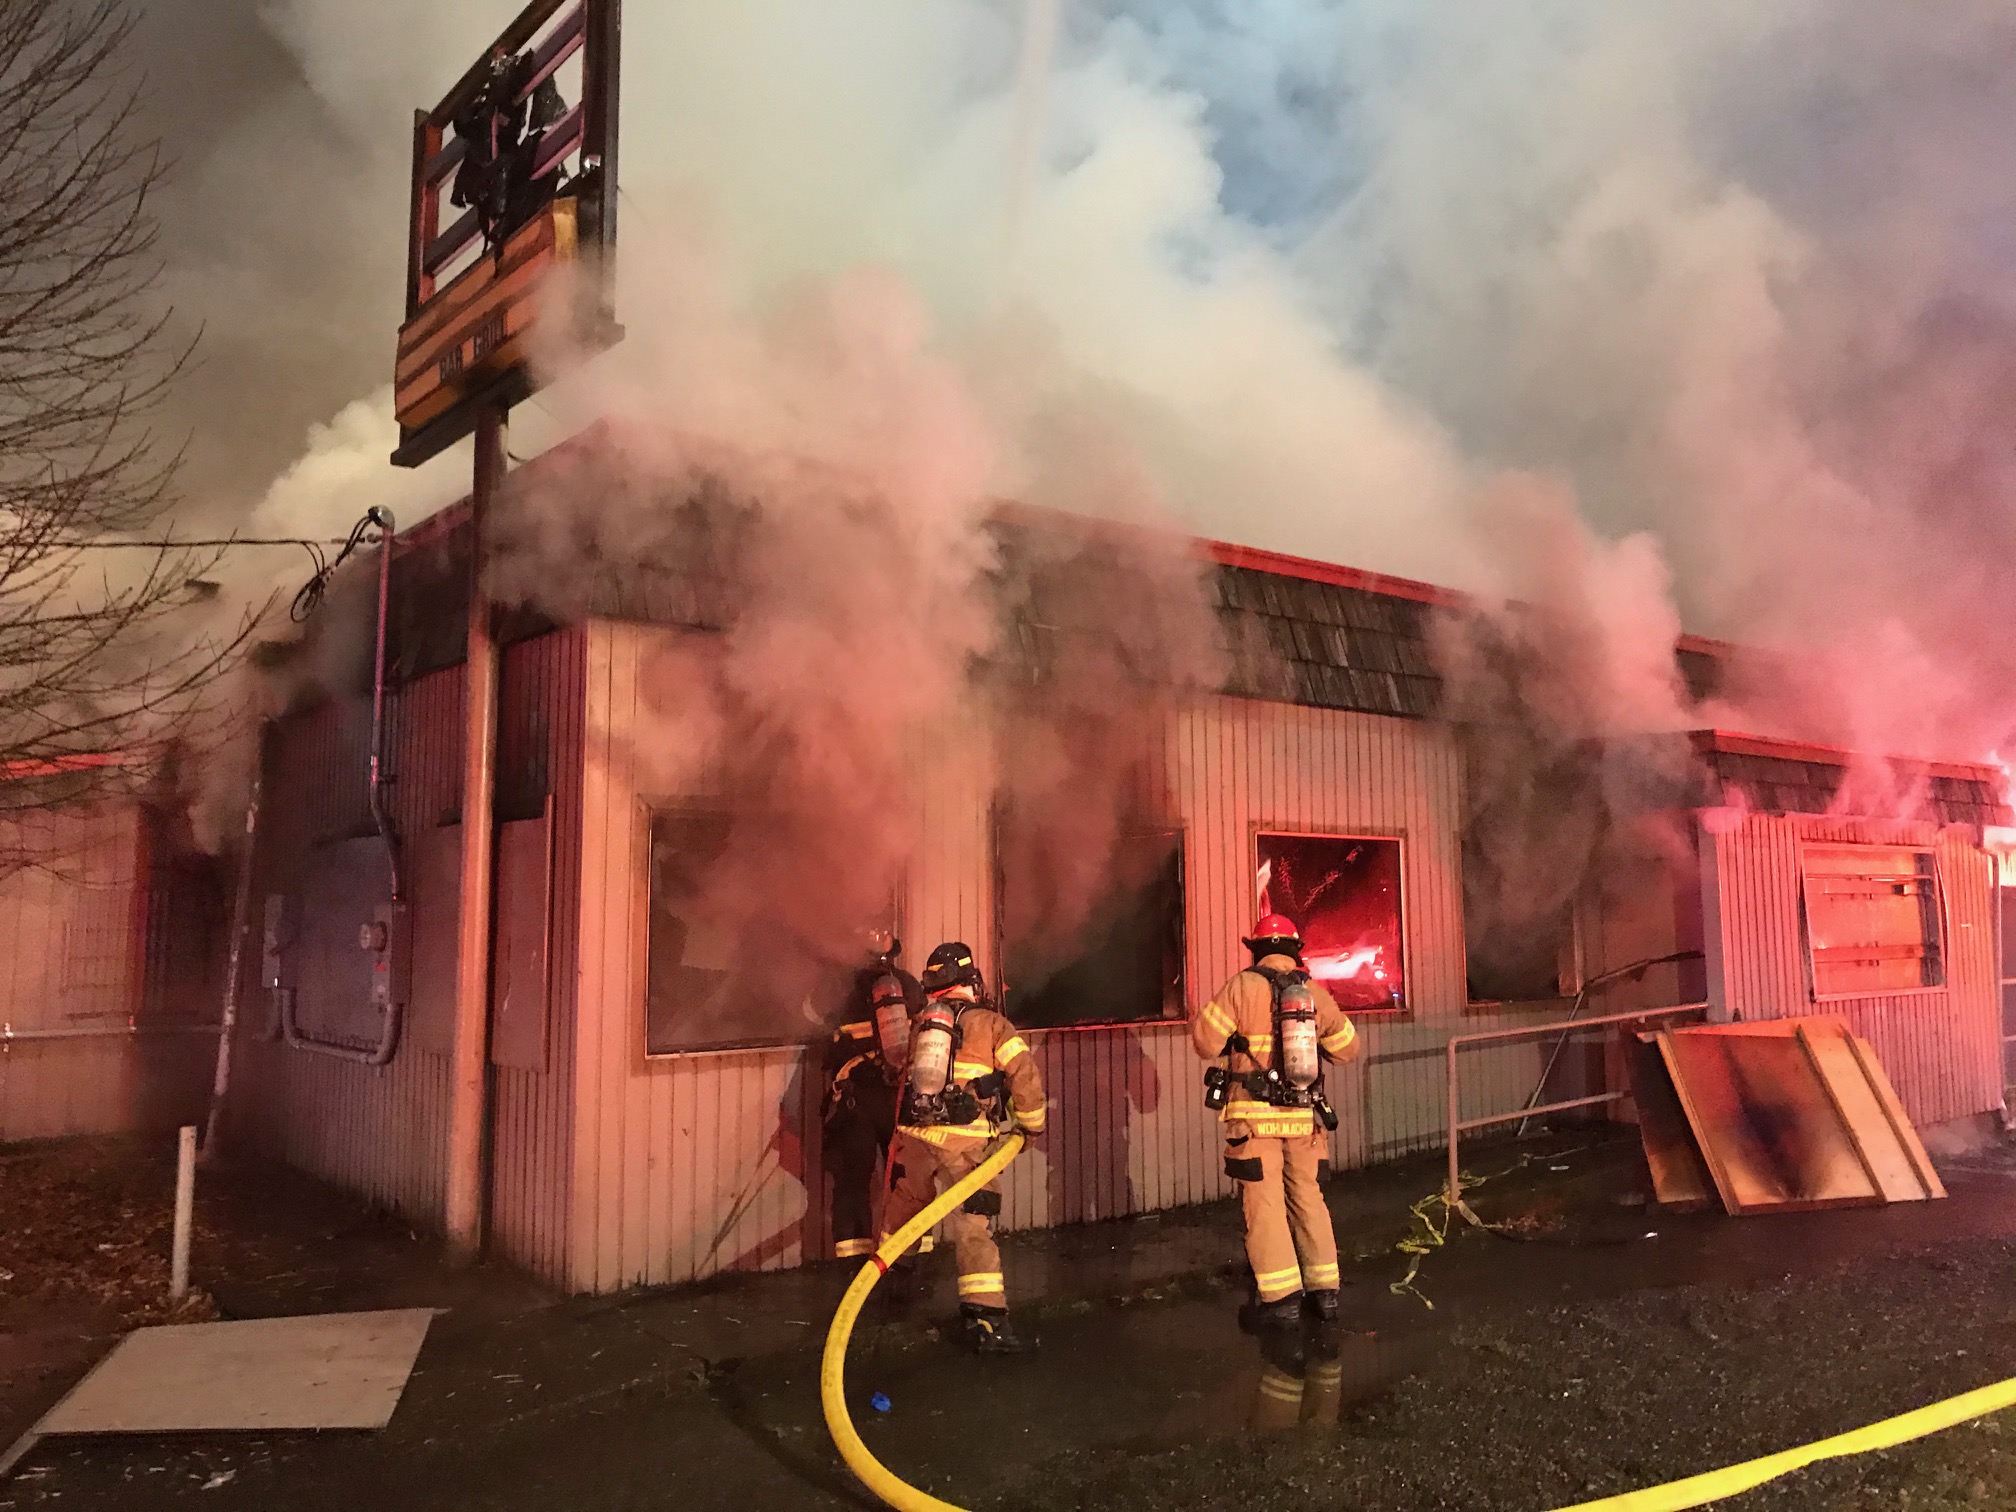 A fire at a restaurant necessitating the presence of firefighters from the Fire Department.